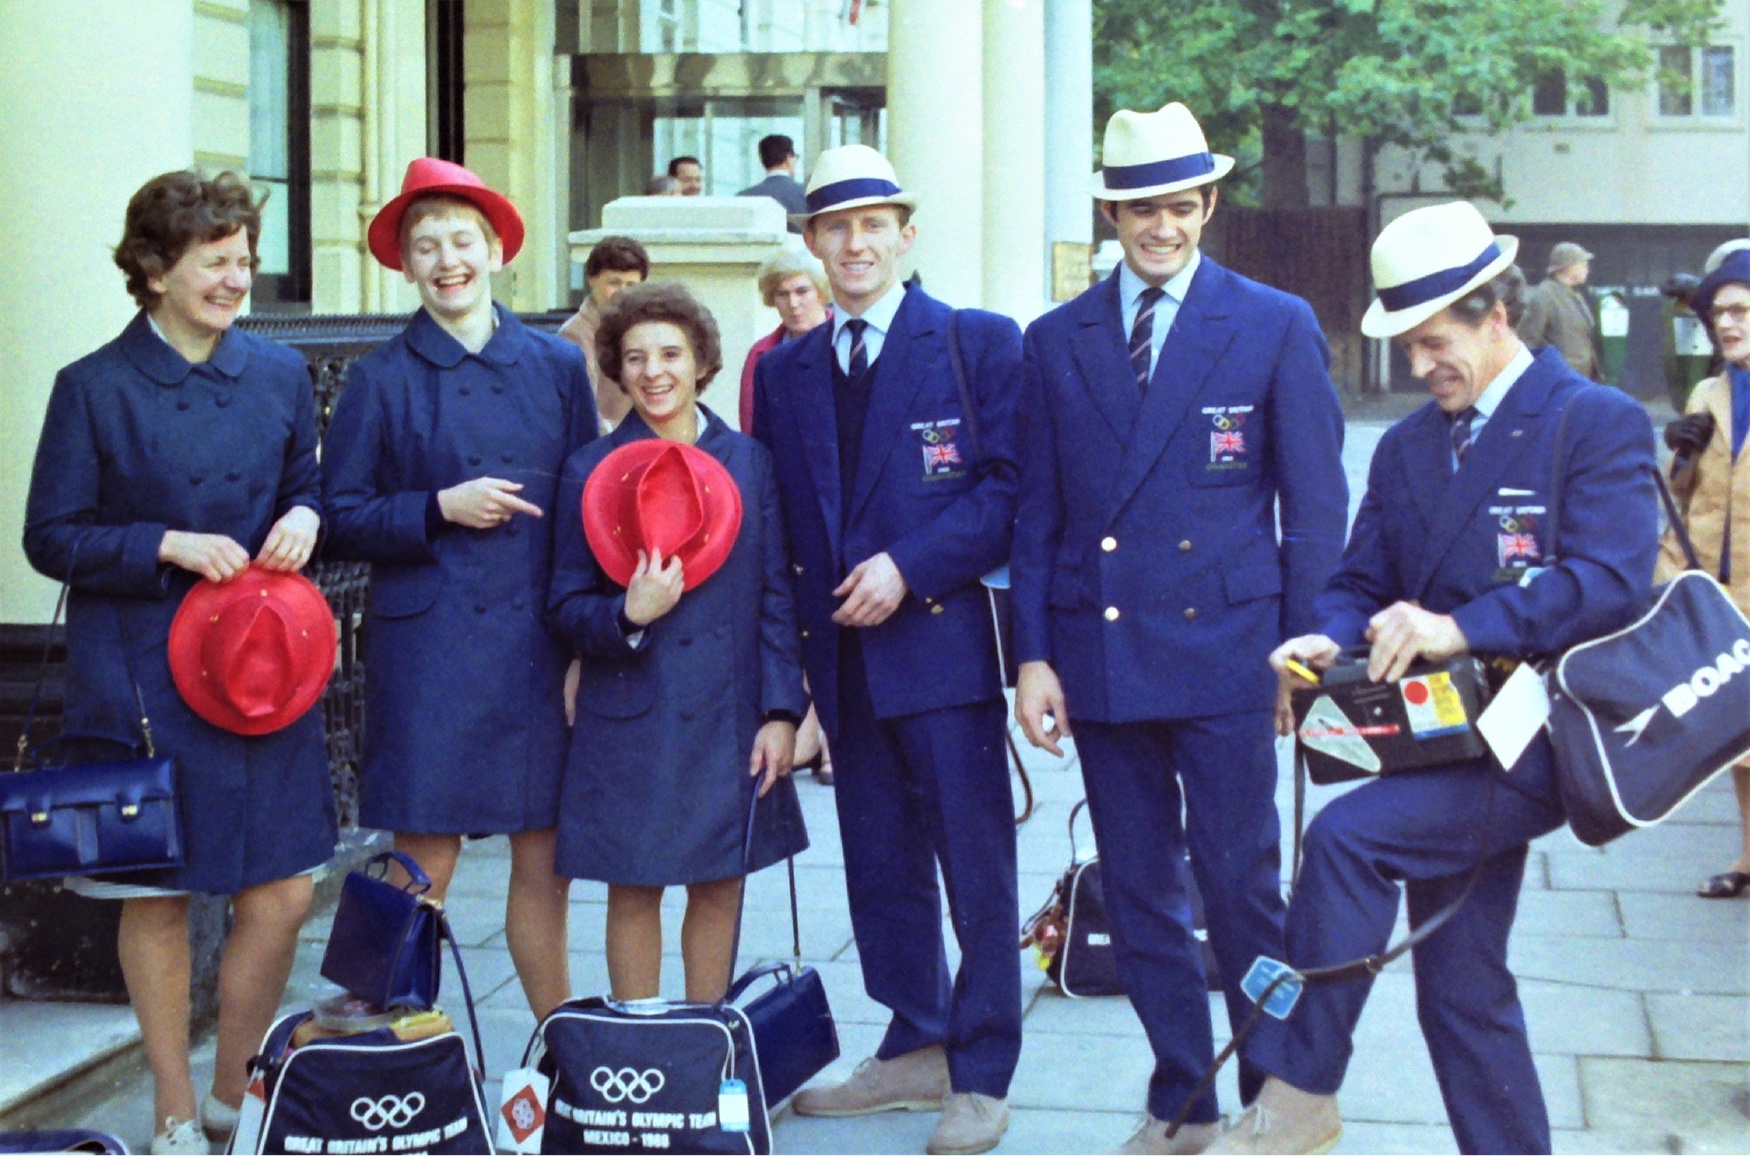 The GB Team on their way to the Mexico Olympic Games in 1968 - Photo Jim Prestidge